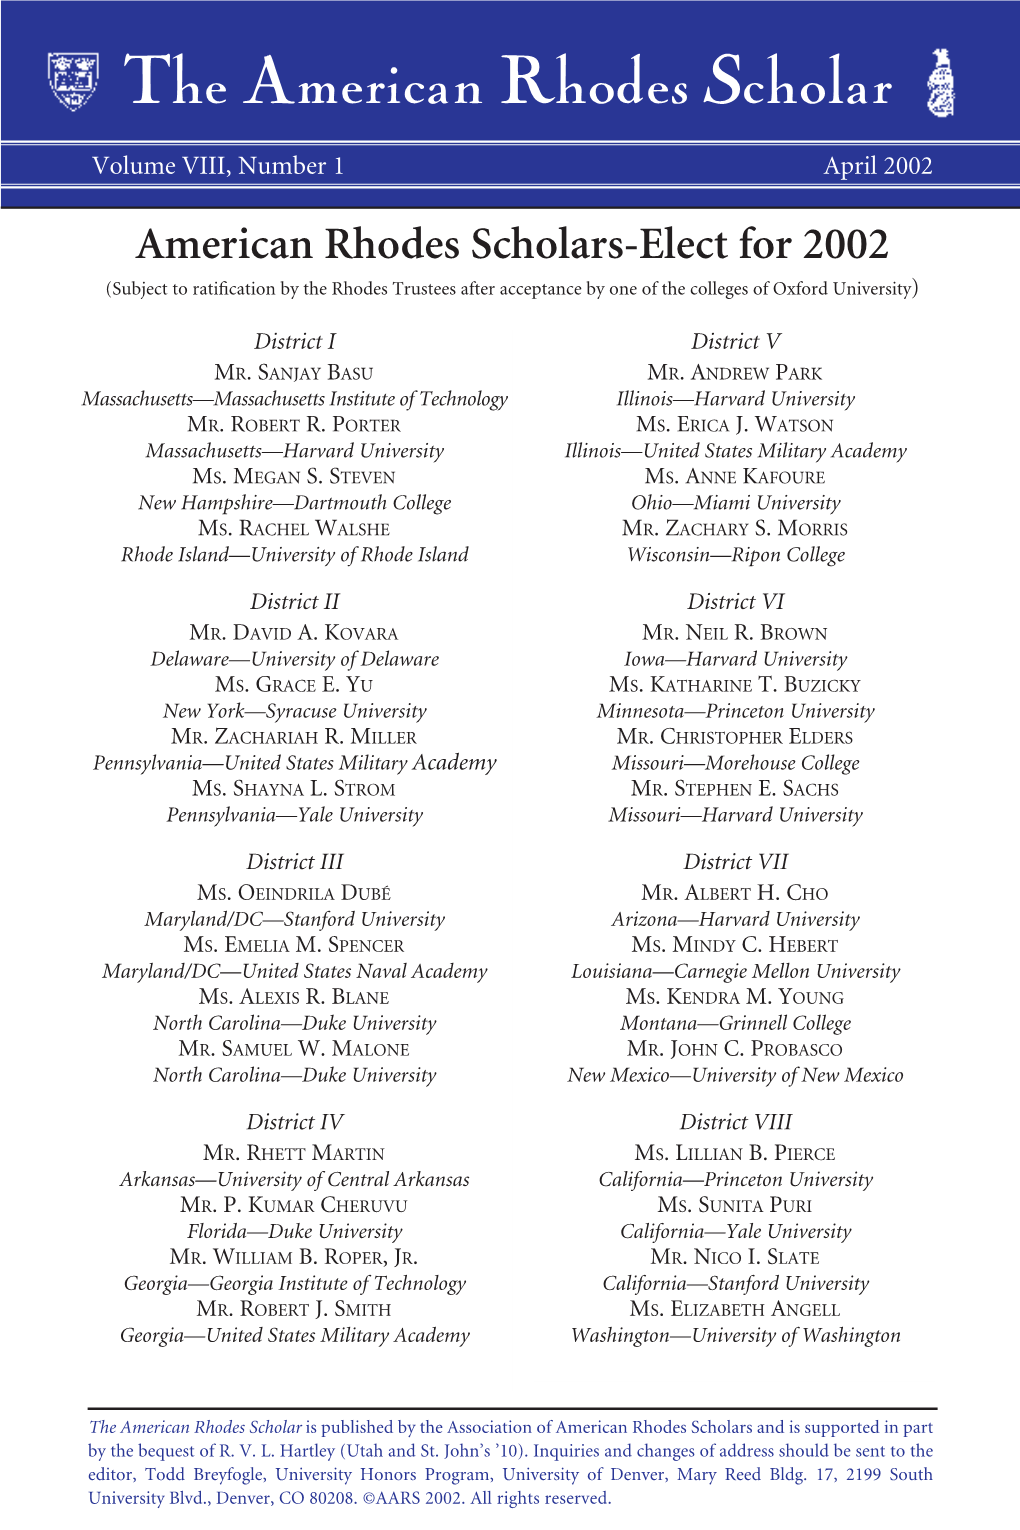 2002 American Rhodes Scholars-Elect for 2002 (Subject to Ratiﬁcation by the Rhodes Trustees After Acceptance by One of the Colleges of Oxford University)